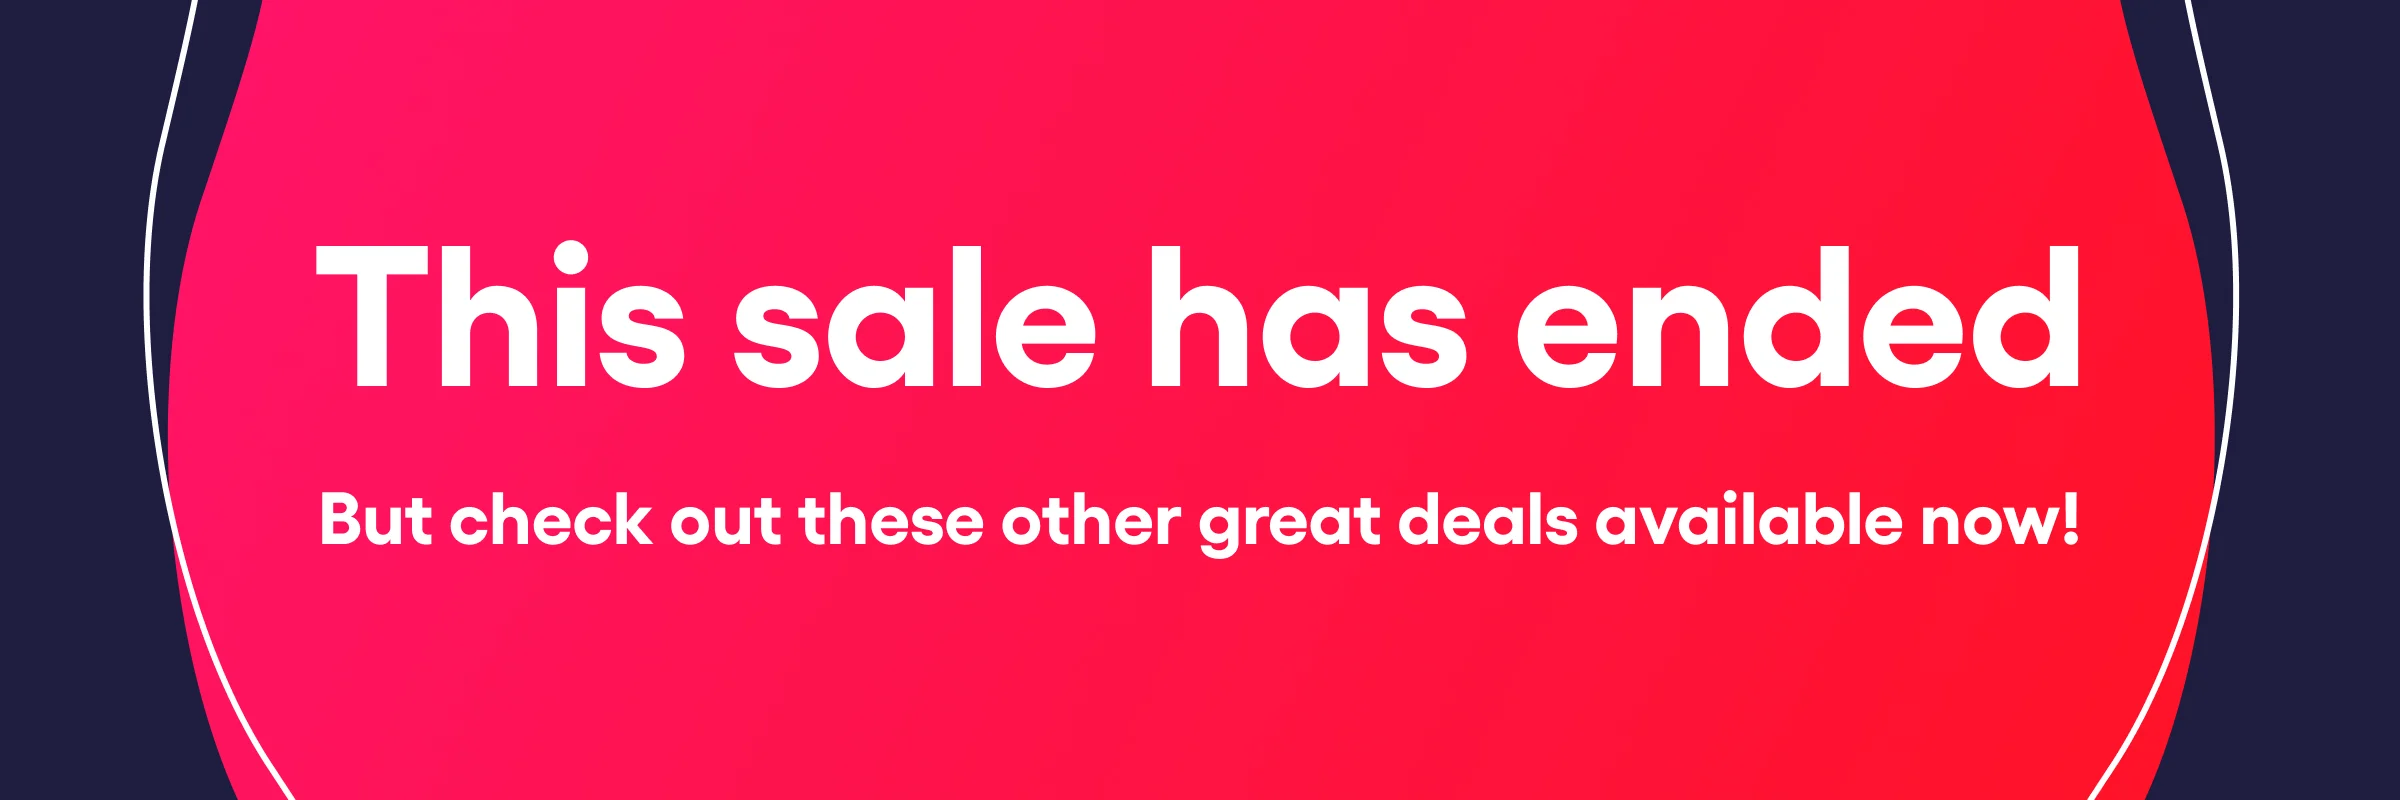 Get Today's Best  Deals While They Last